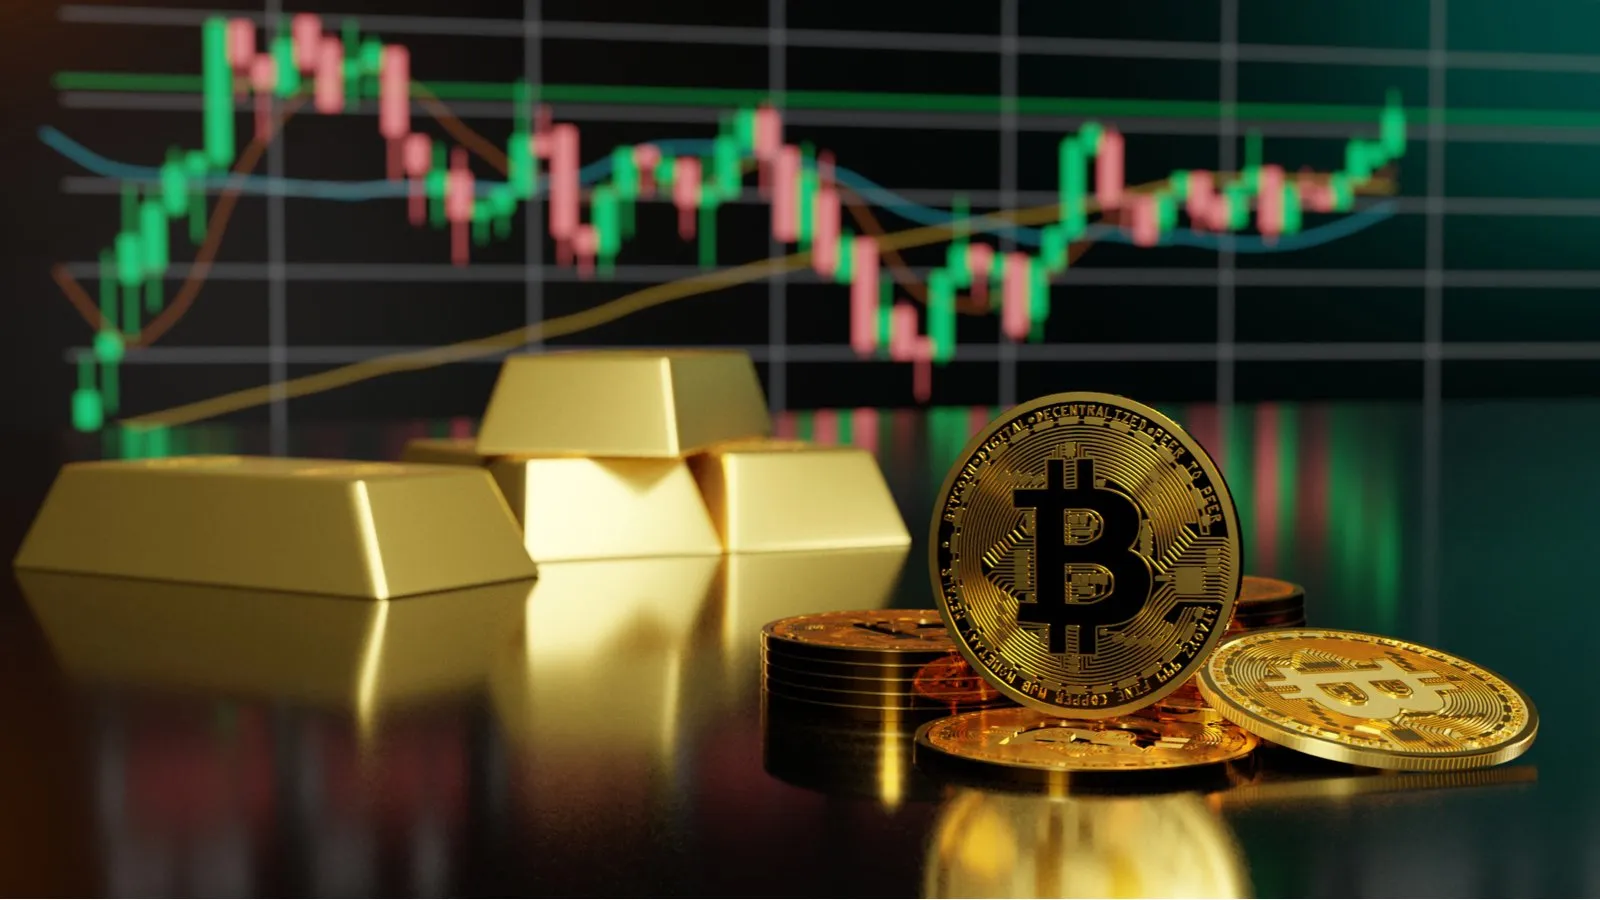 Bitcoin and gold. Image: Shutterstock